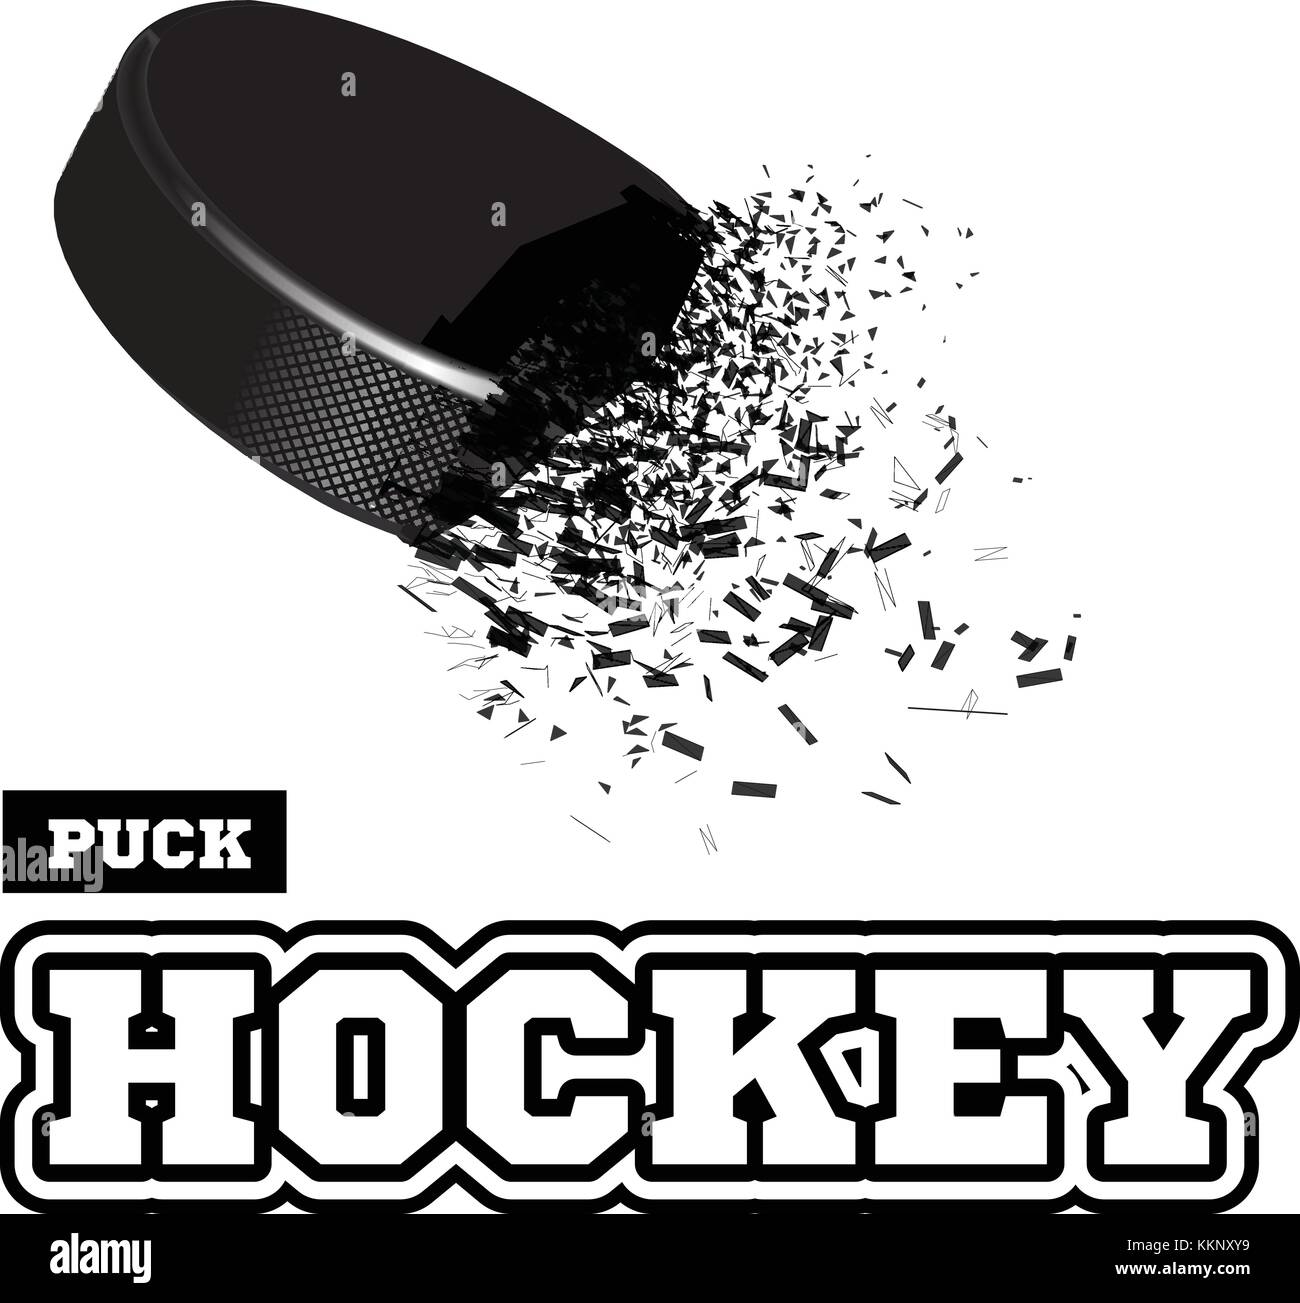 Clipart of a Black and White Hockey Puck and Net - Royalty Free